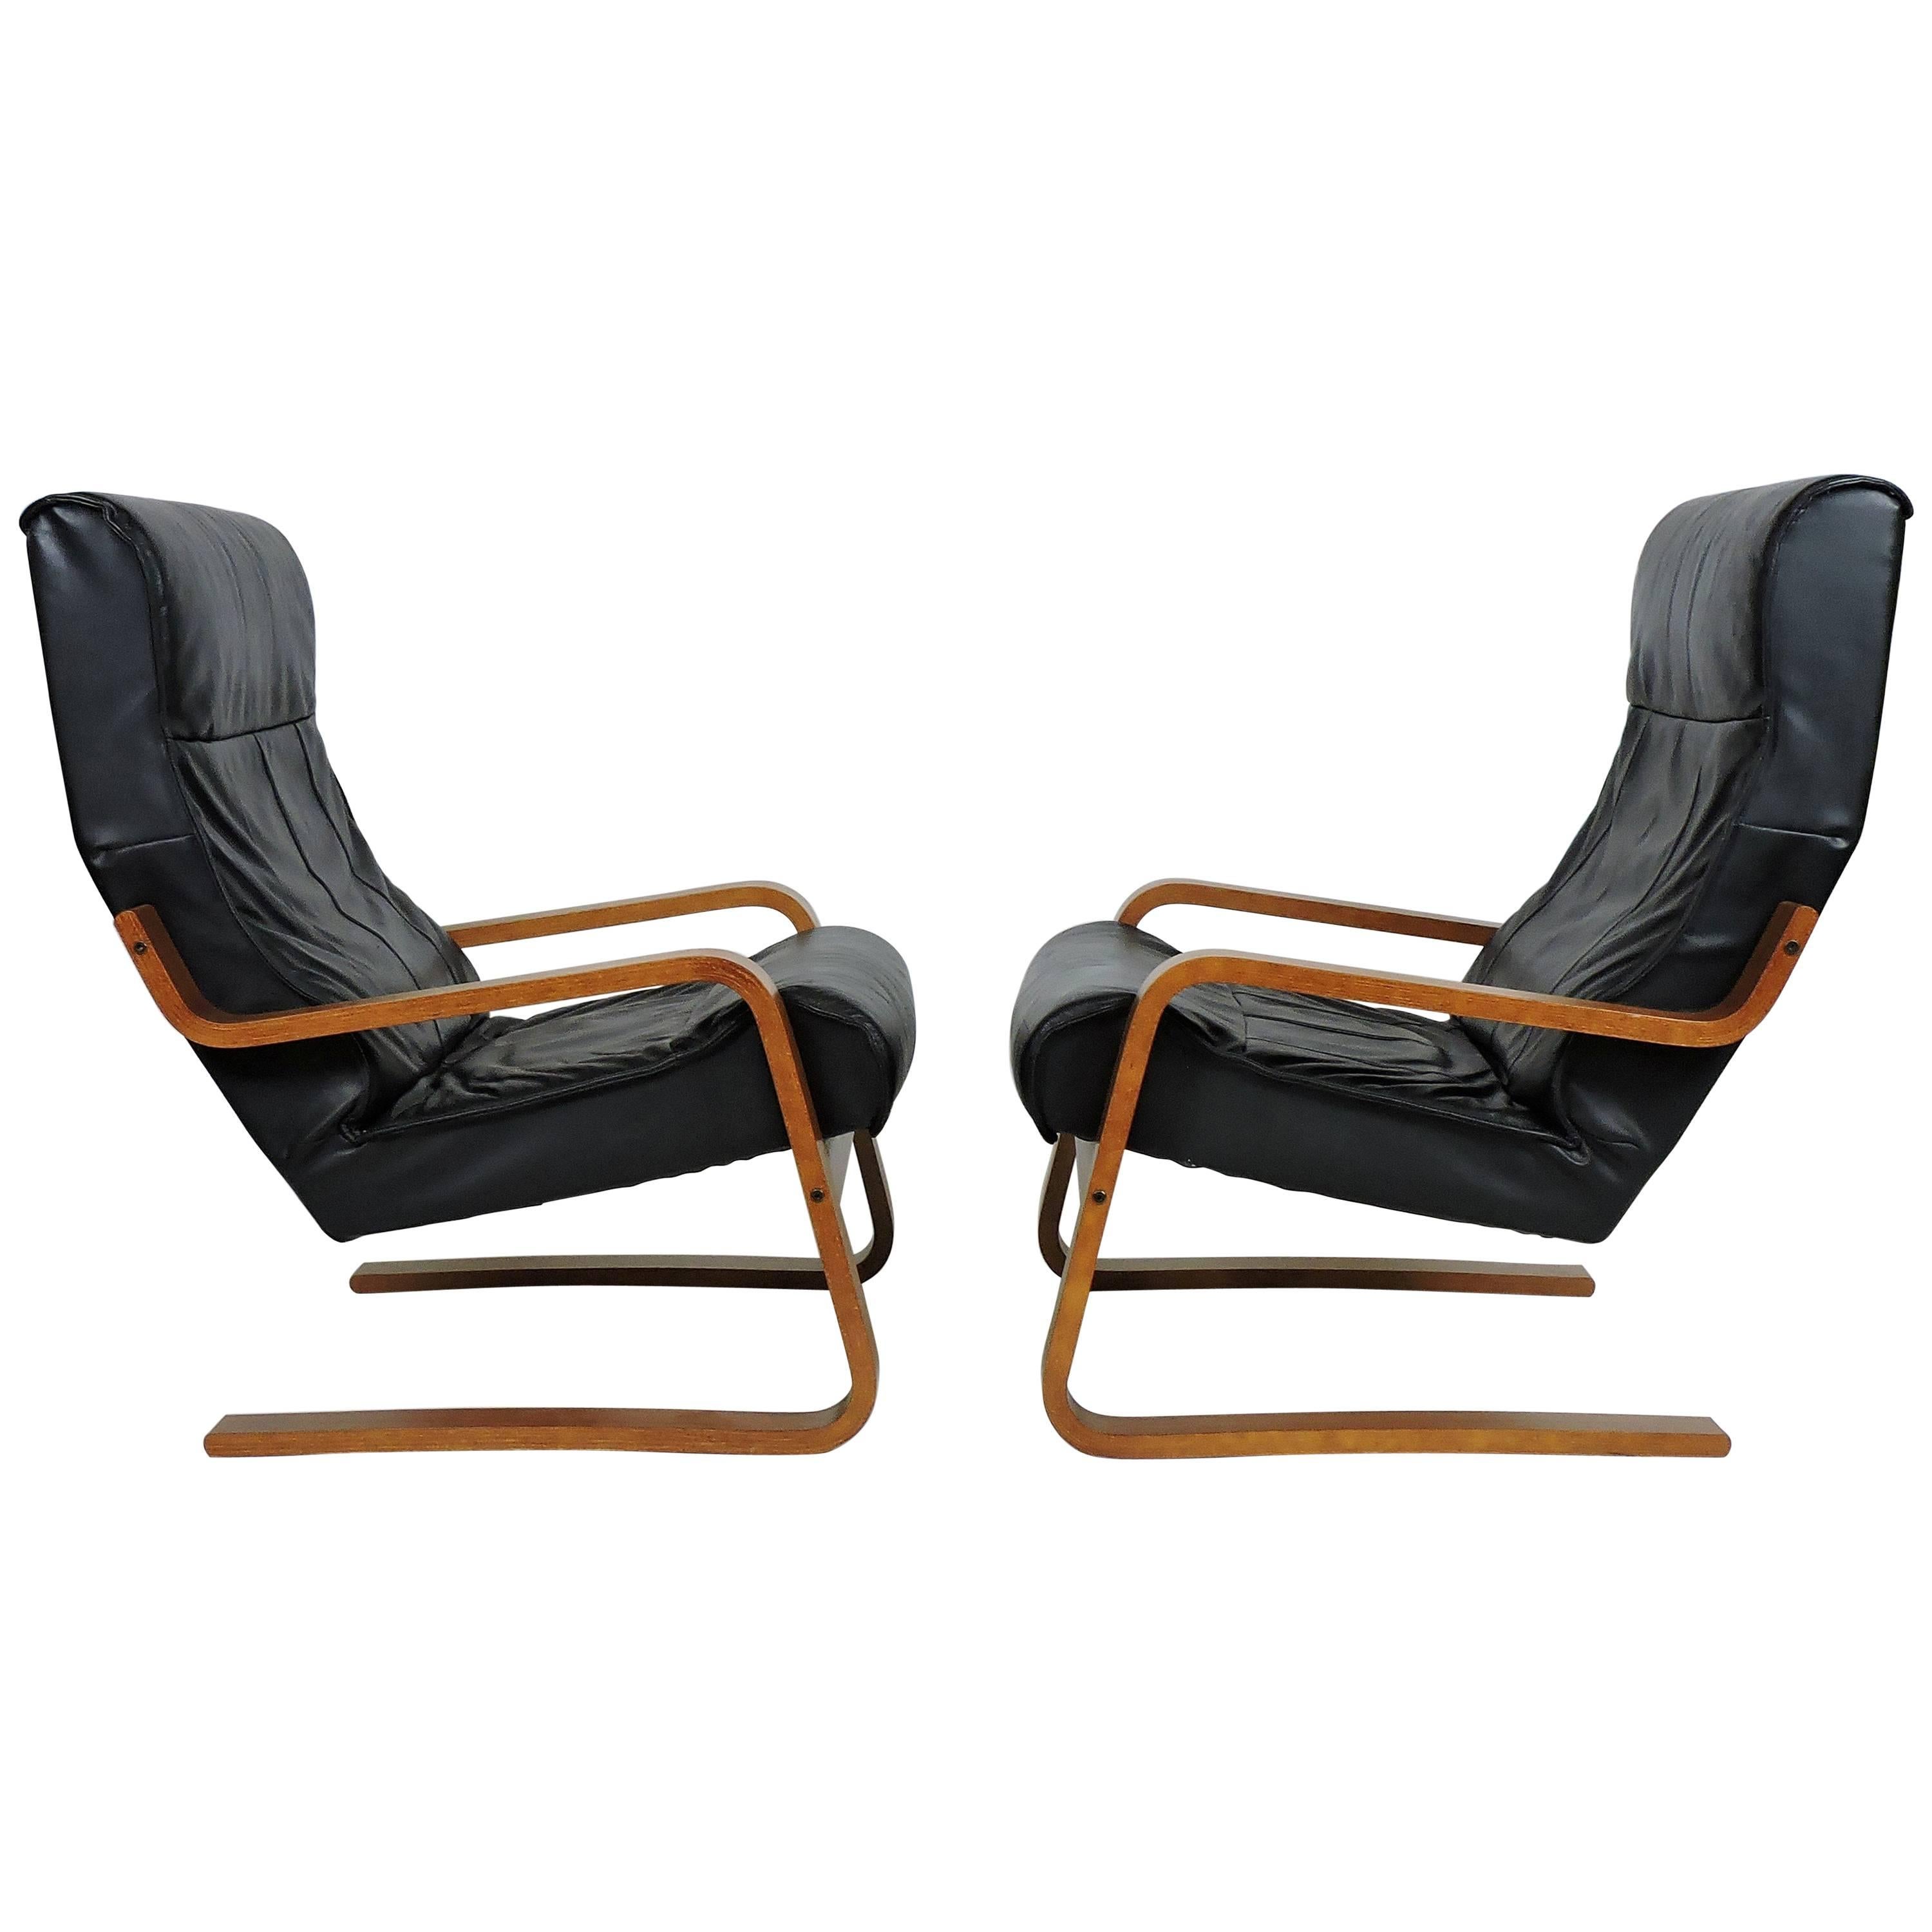 Pair of Danish Modern Alvar Aalto Style Cantilevered Teak Leather Lounge Chairs